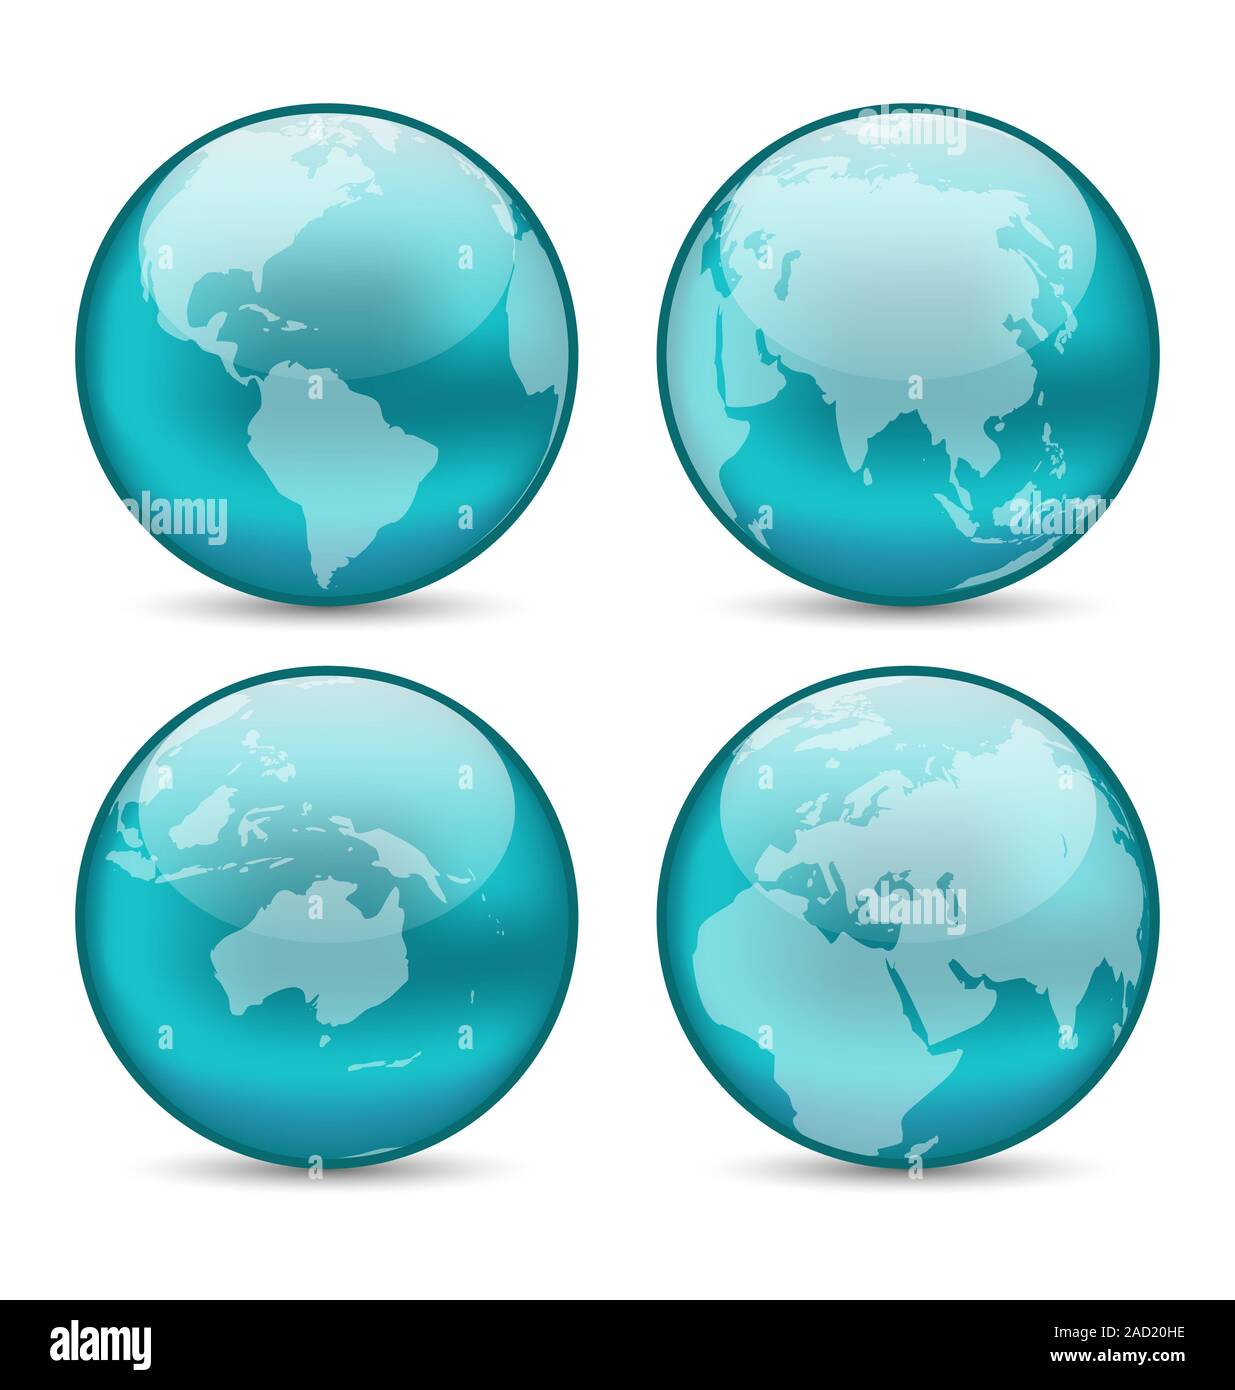 Set globes showing earth with continents Stock Photo